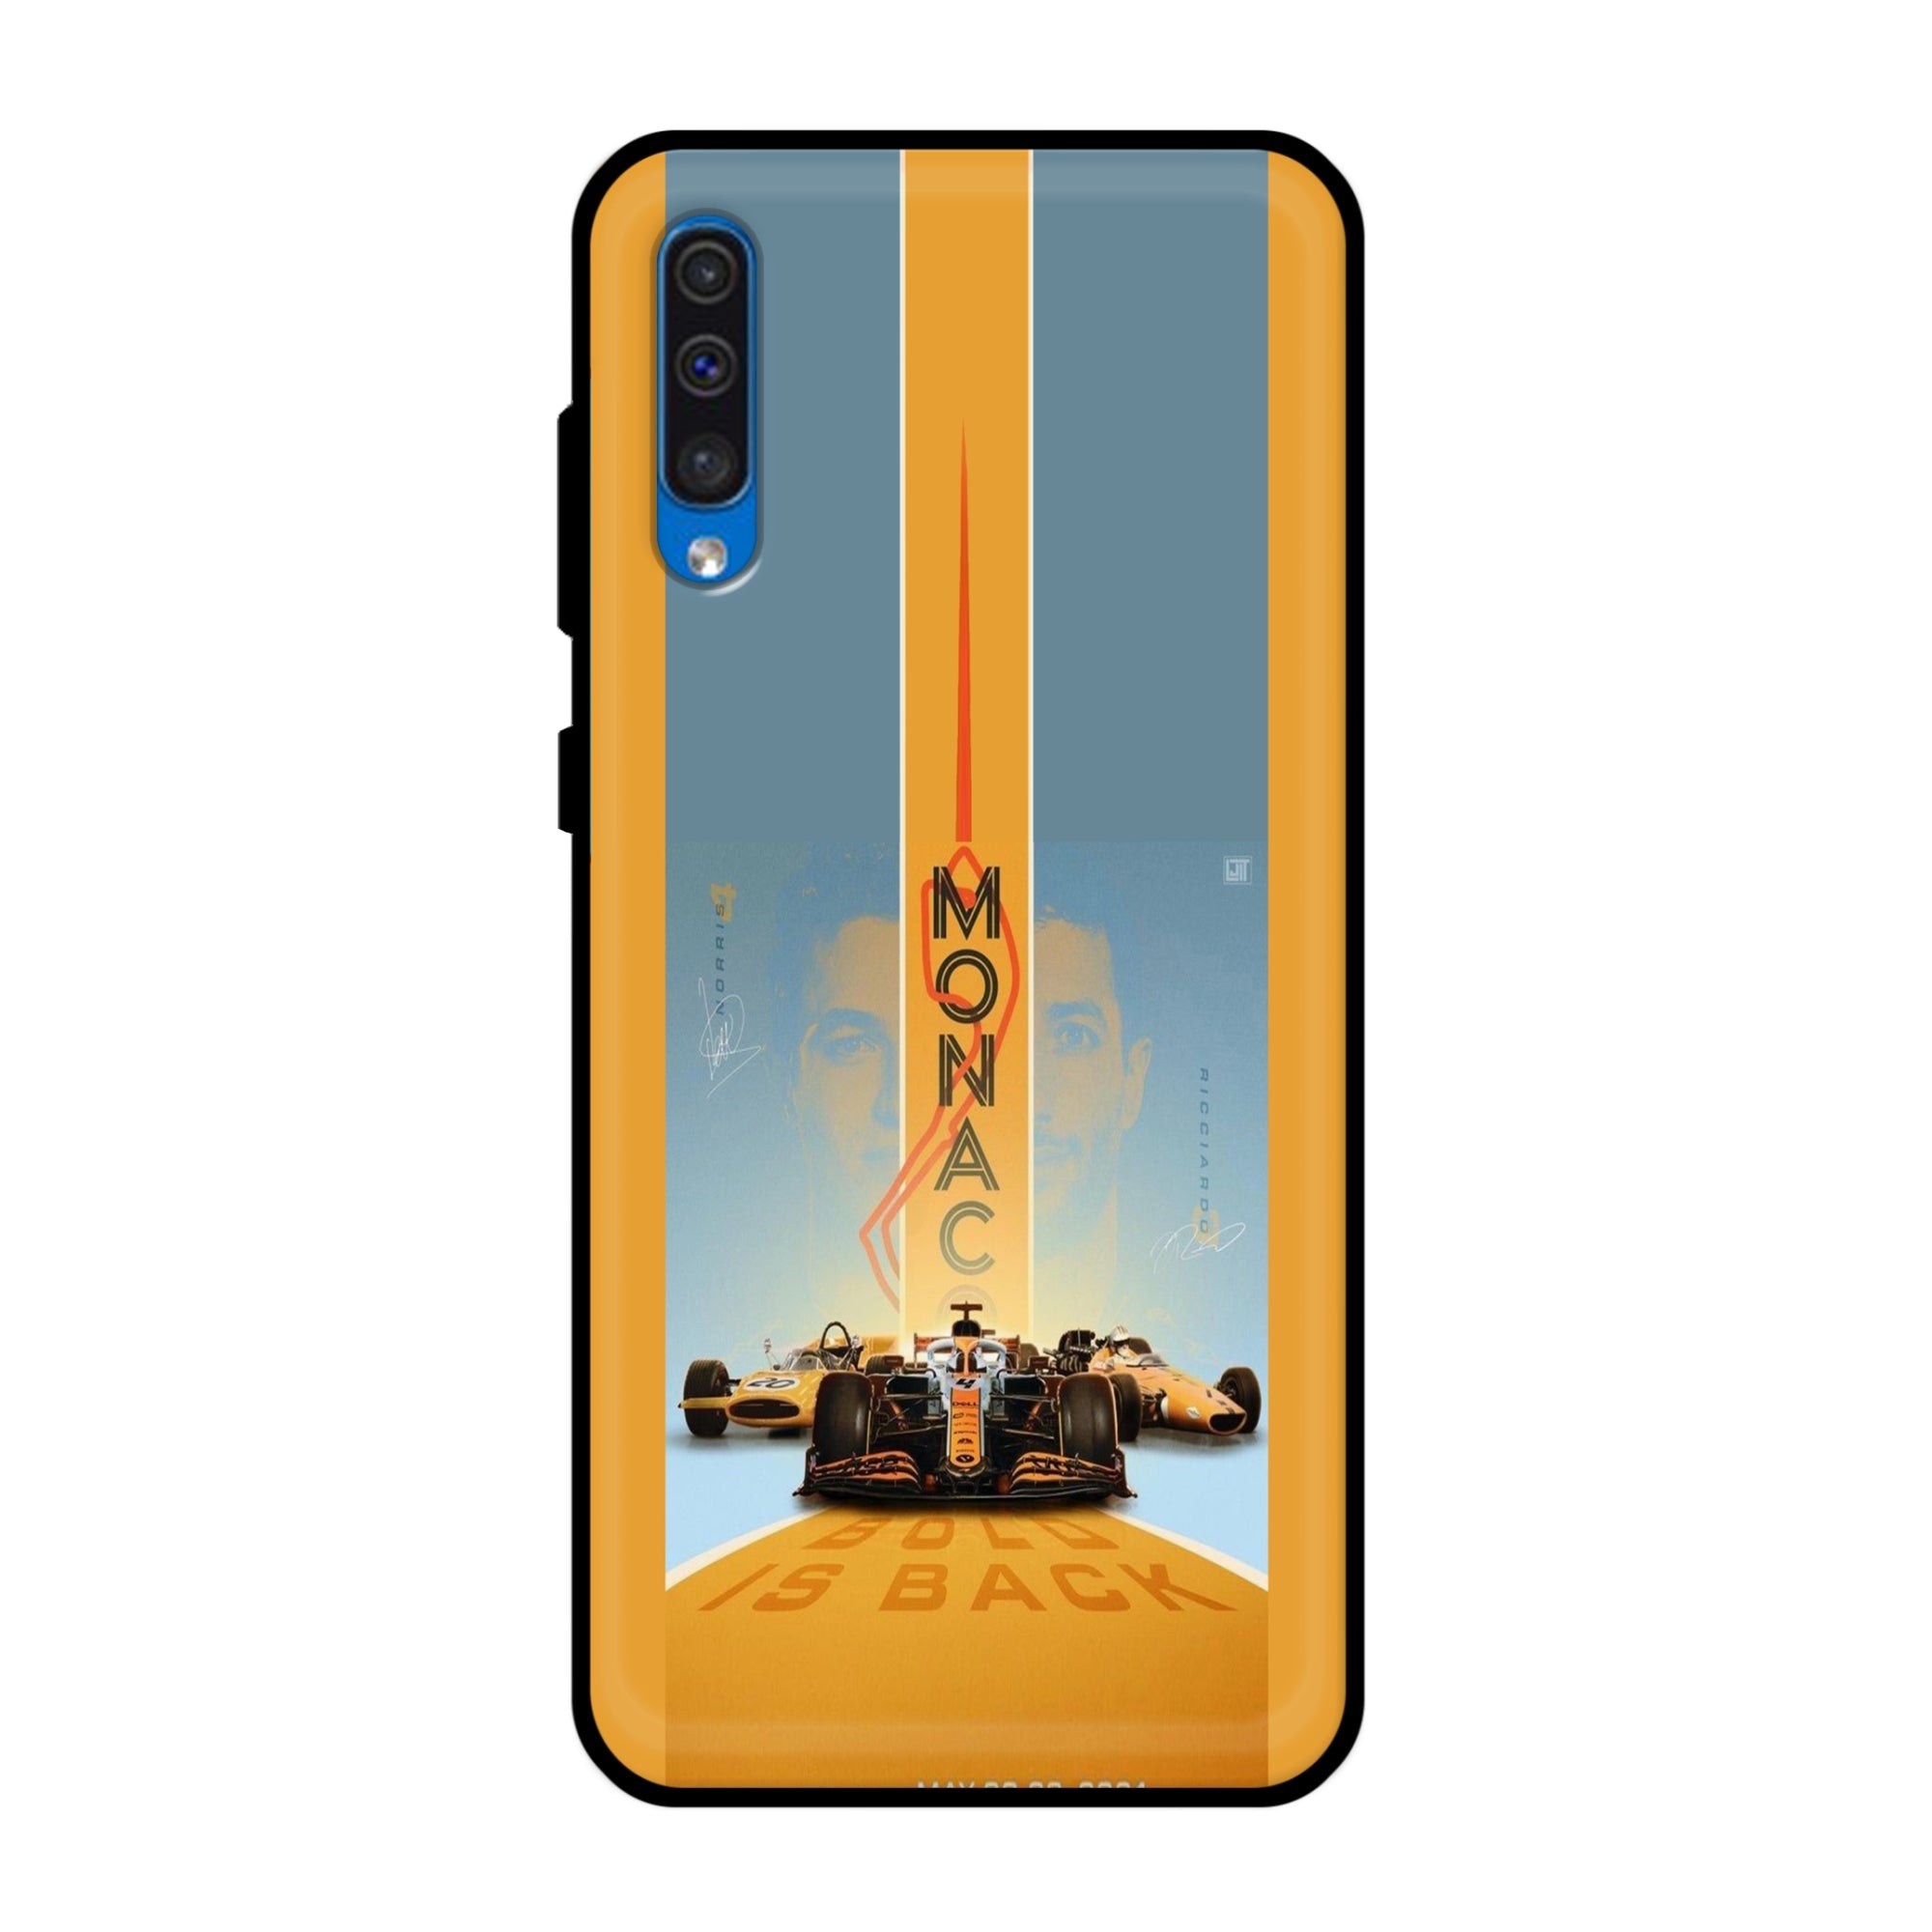 Buy Monac Formula Metal-Silicon Back Mobile Phone Case/Cover For Samsung Galaxy A50 / A50s / A30s Online